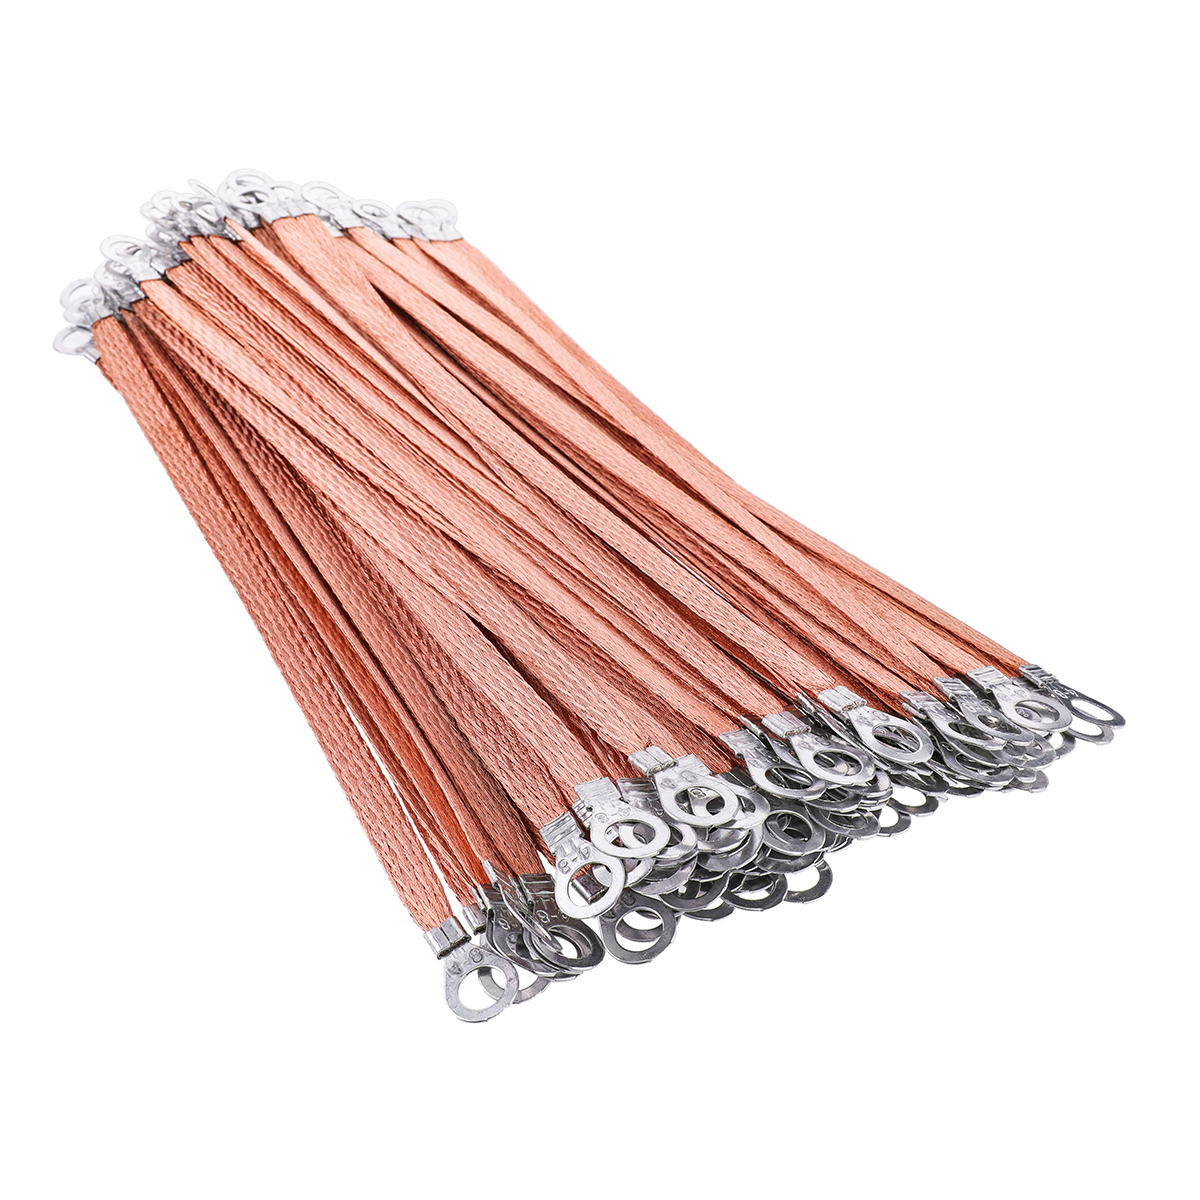 Durable-Pure-Copper-Braided-Wire-Span-Cable-Bridge-Connection-Wire-Ground-Lead-1382433